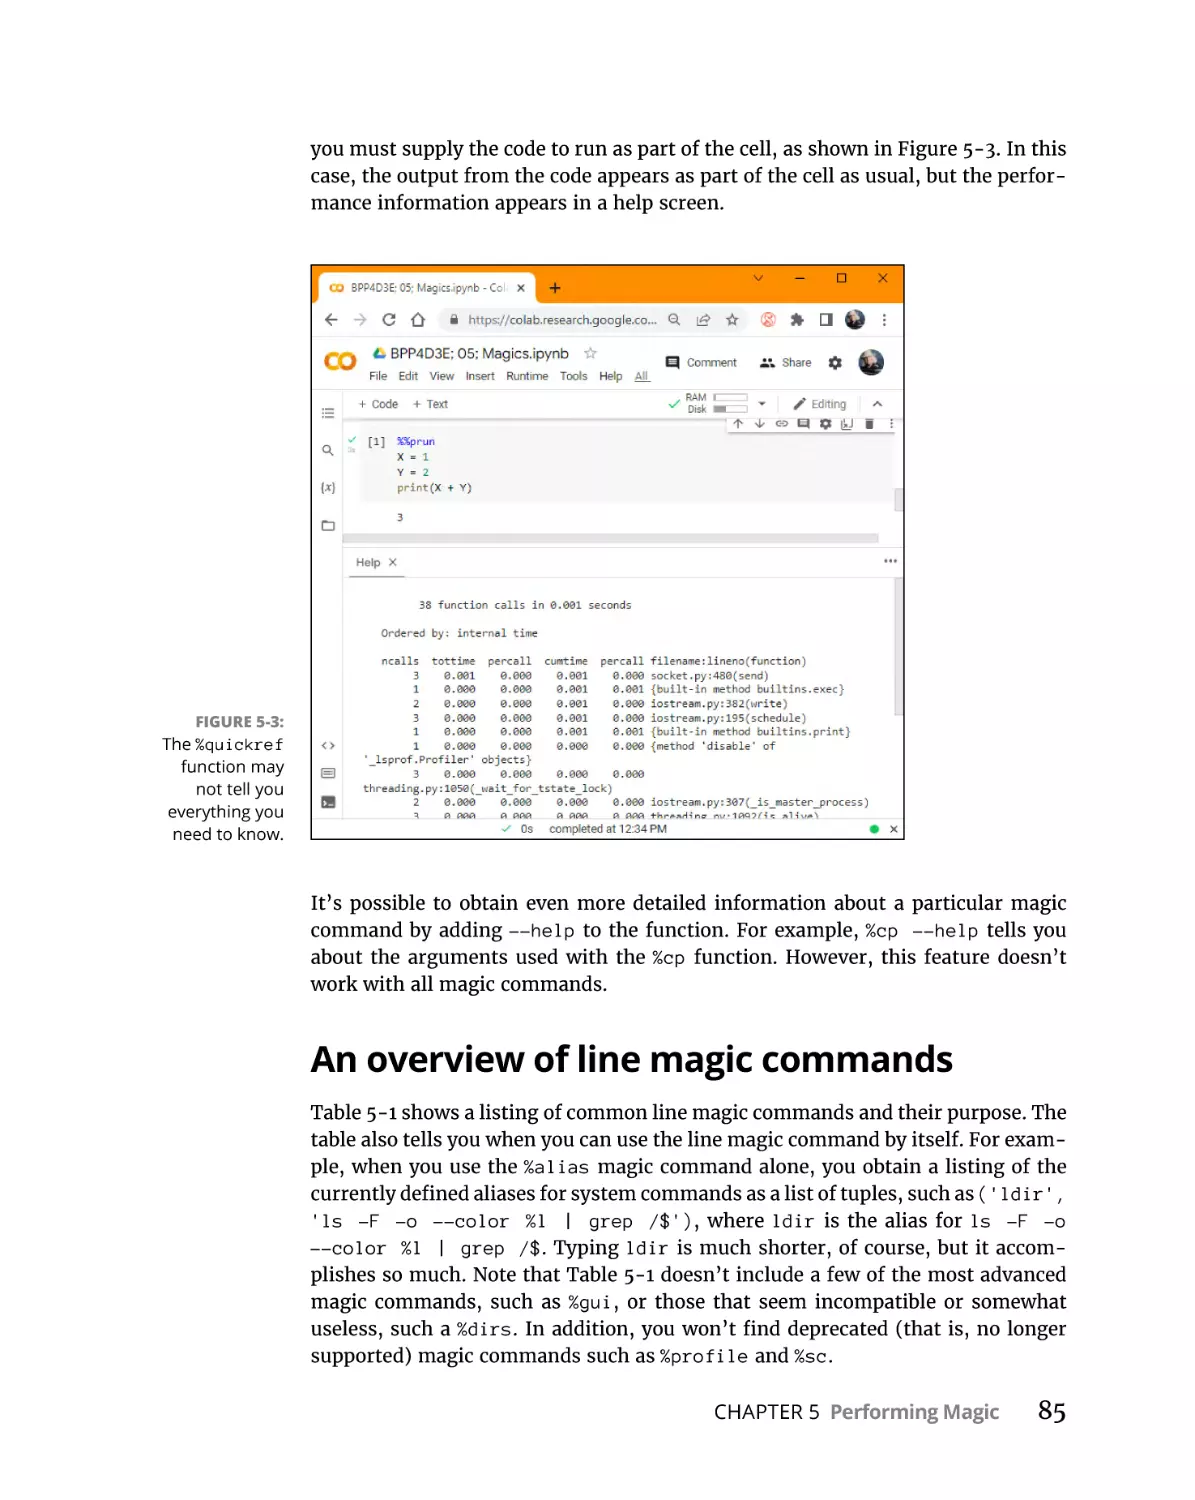 An overview of line magic commands